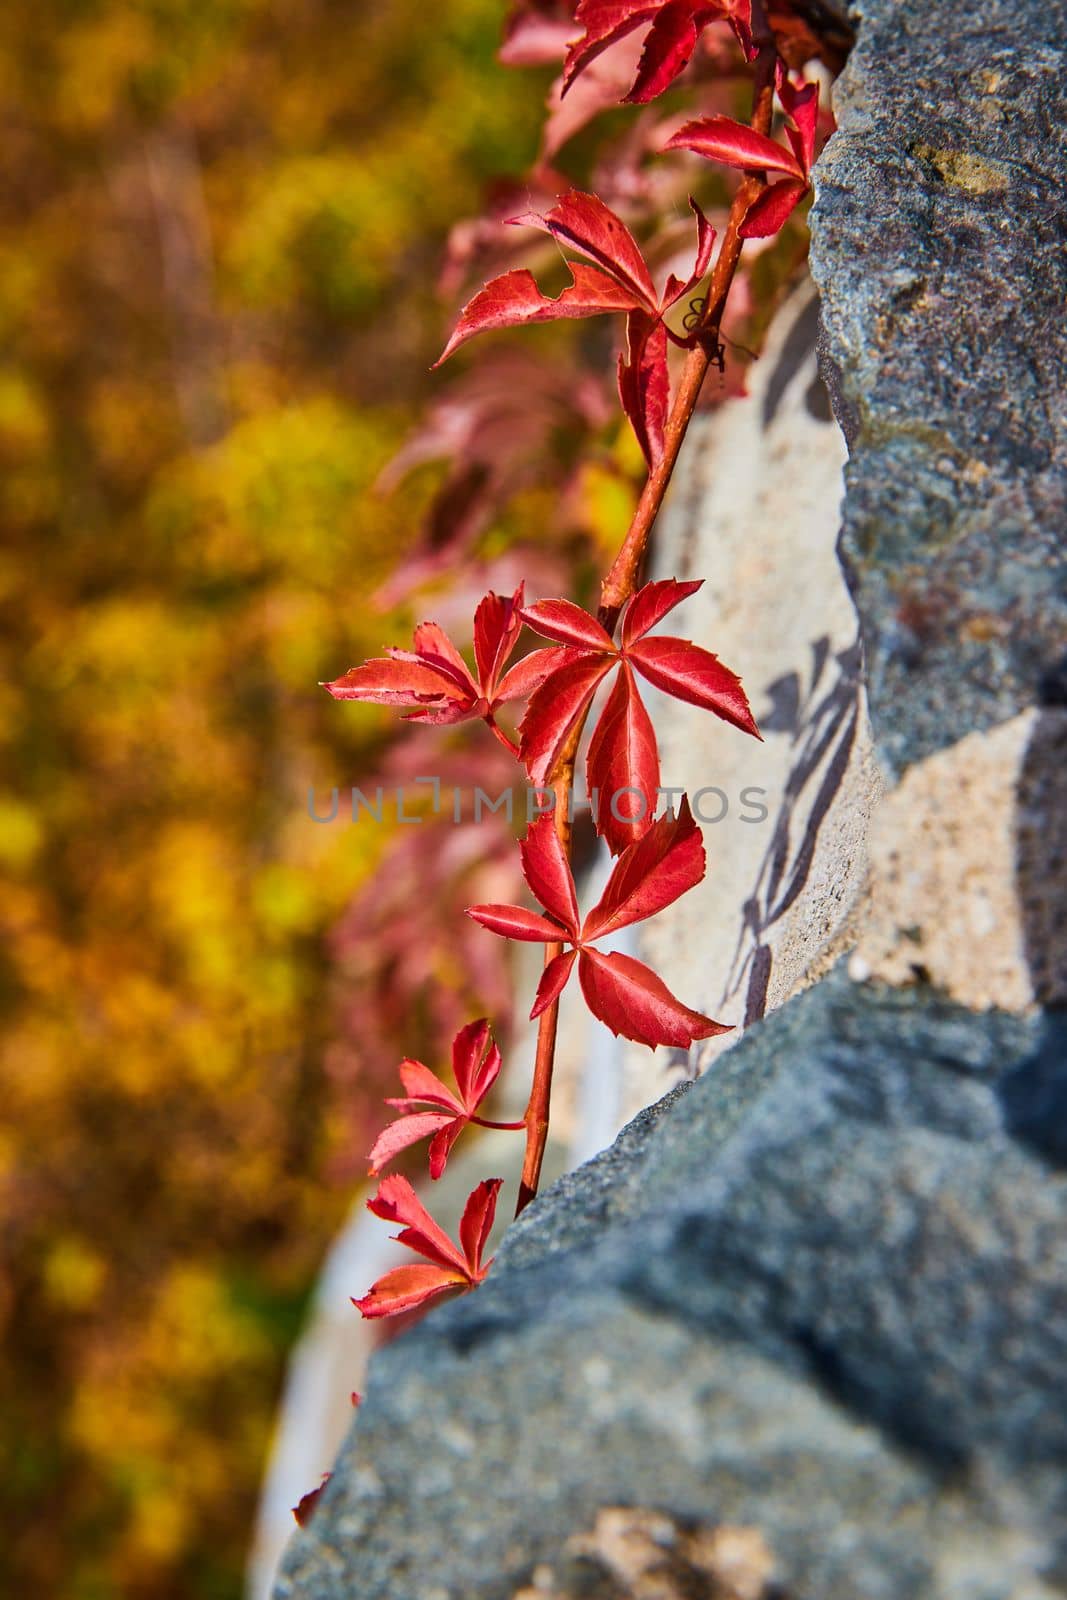 Red vine plant detail growing on stone wall from side with soft colorful plants behind by njproductions